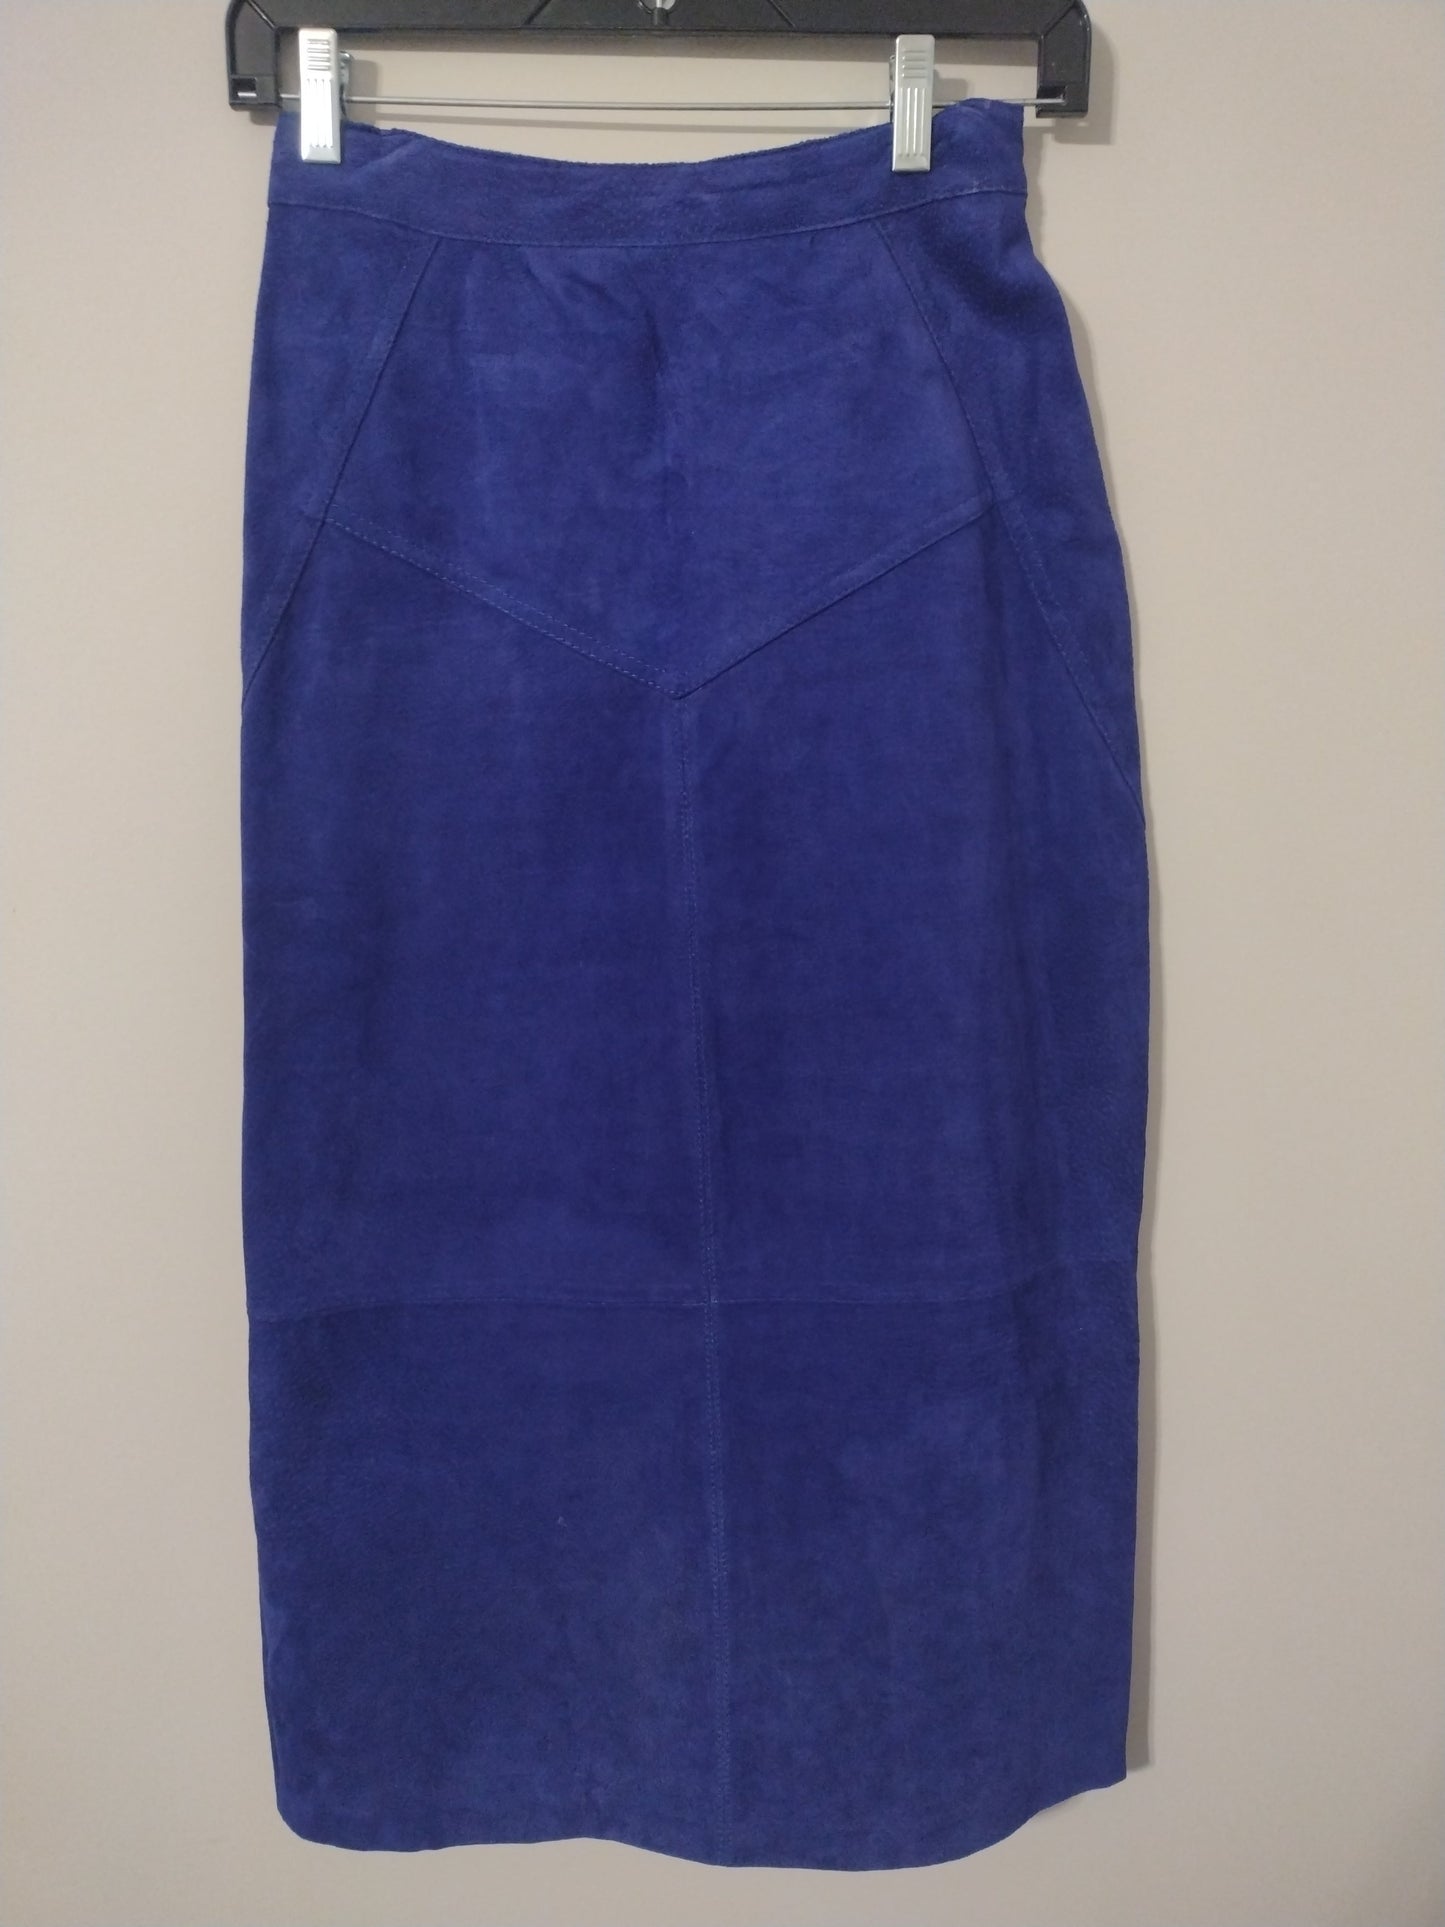 Skirt Maxi By Clothes Mentor  Size: 8